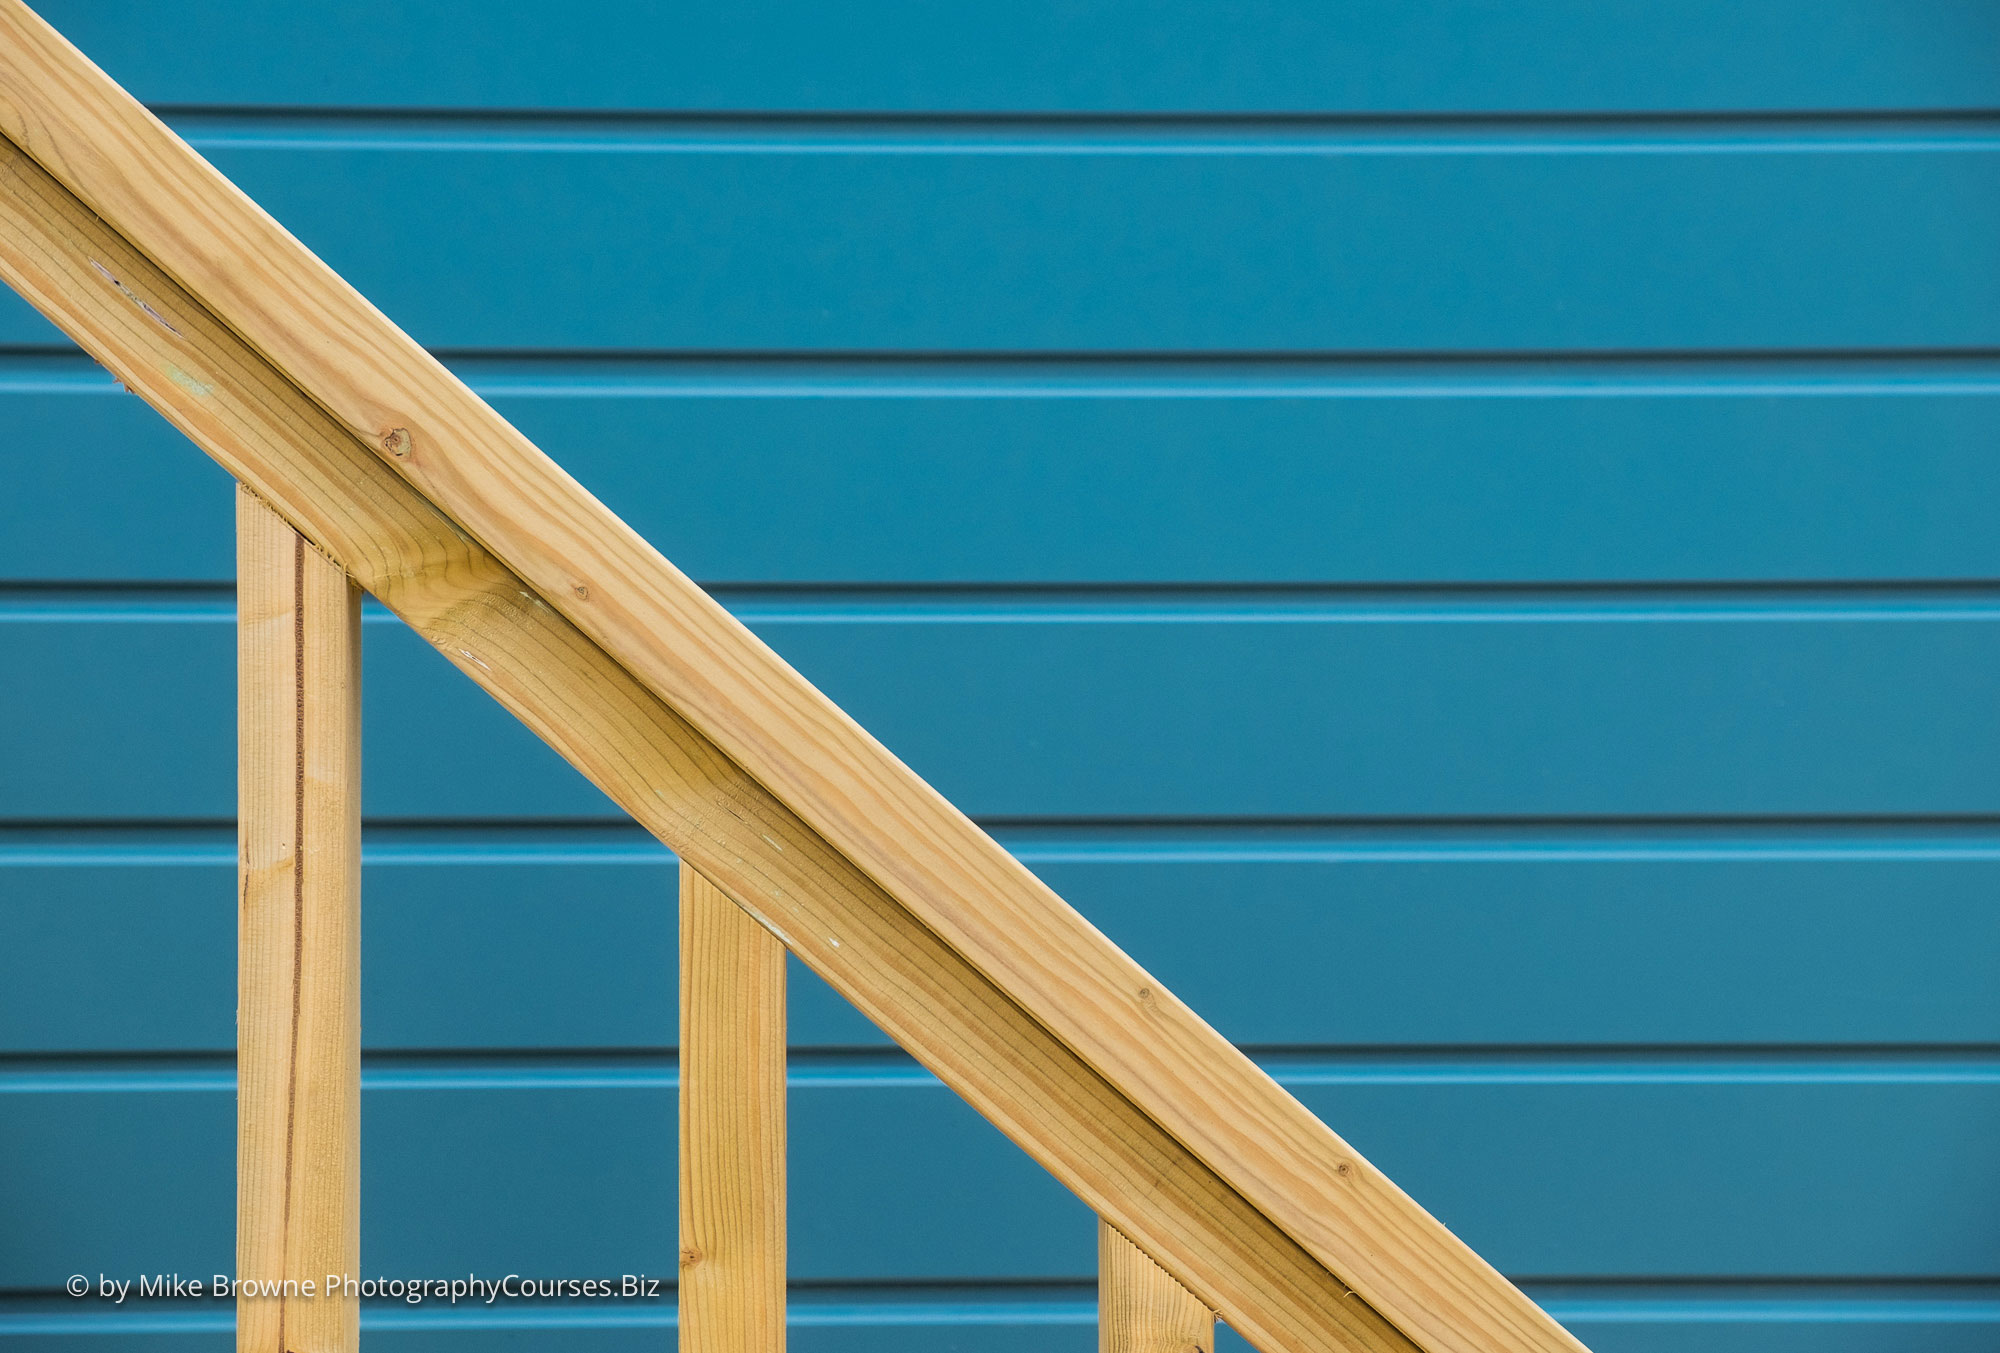 Contrasting brown hand rail in front of blue horizontal panelling of beach hut